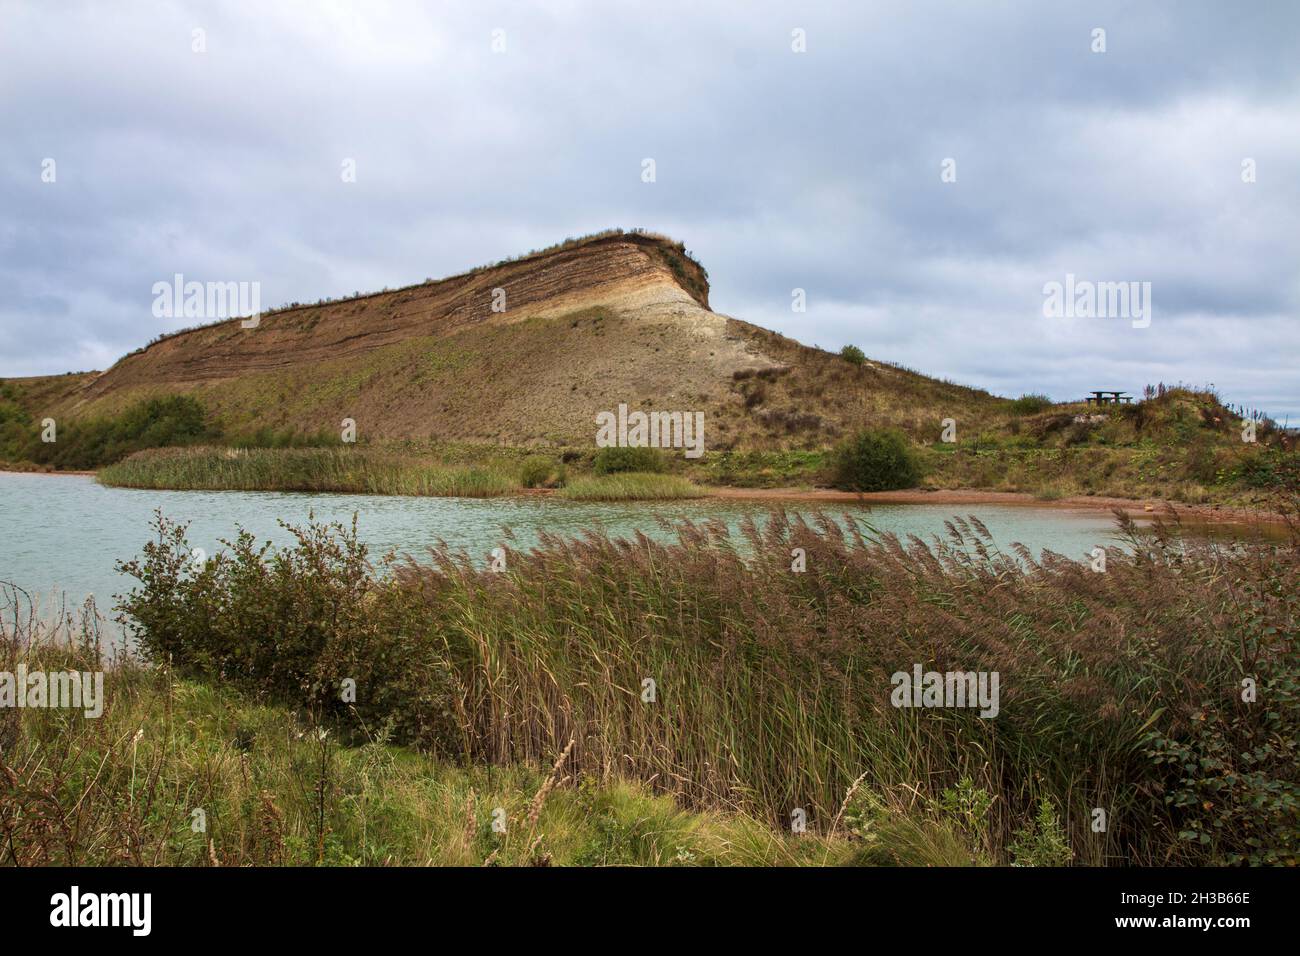 Cliff made of clay on the island Mors, Denmark Stock Photo